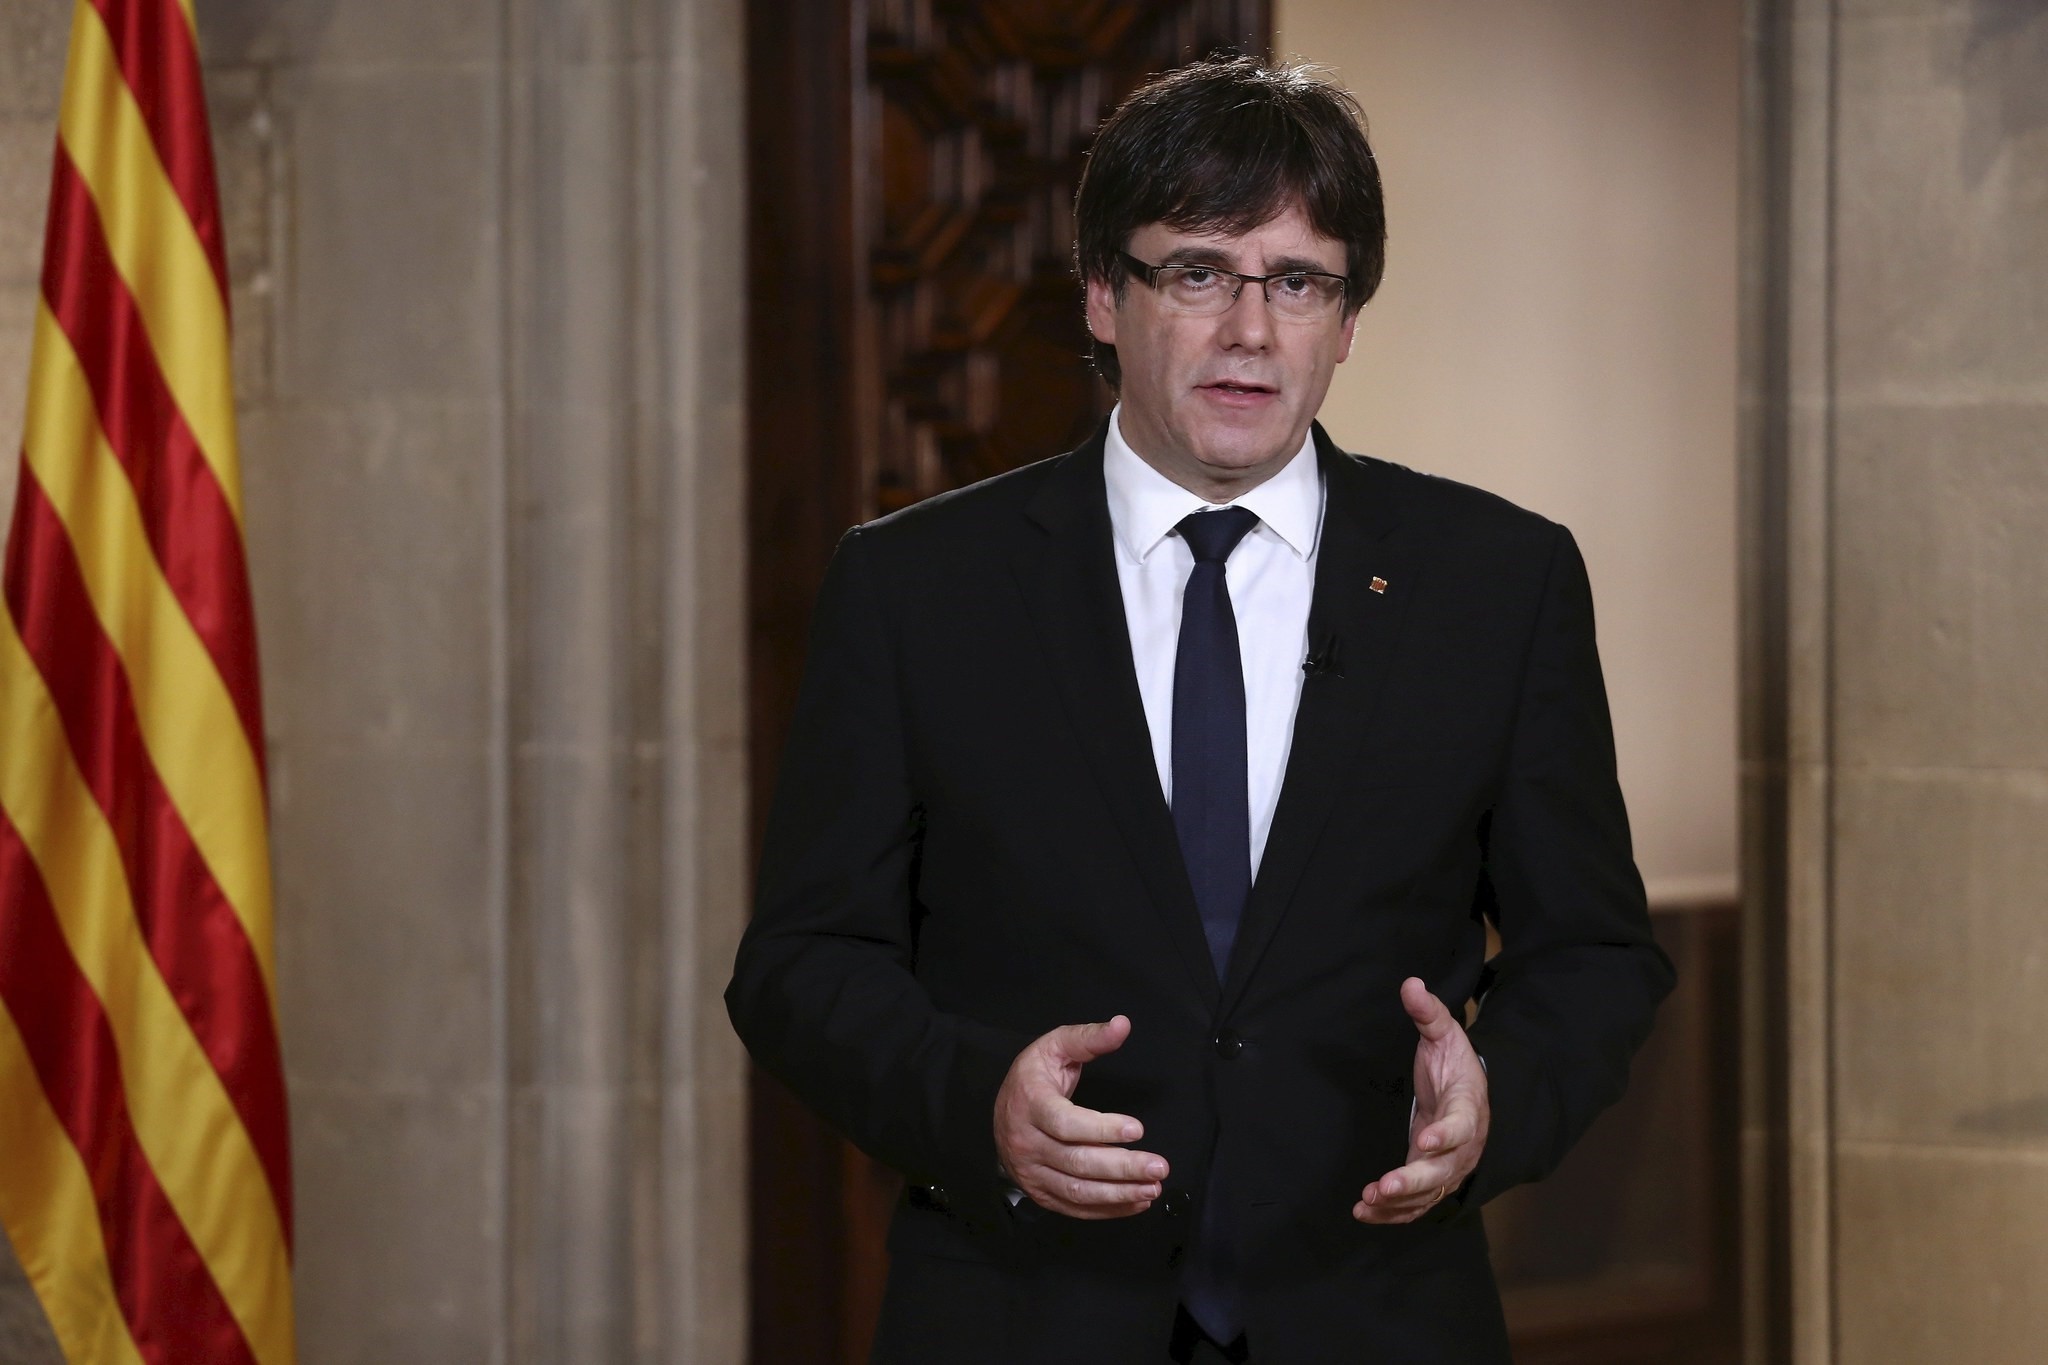 Catalonian President Carles Puigdemont giving a speech three days after the celebration of the Catalonian illegal referendum, at Palau de la Generalitat in Barcelona, Spain, Oct. 4 2017 (EPA Photo)